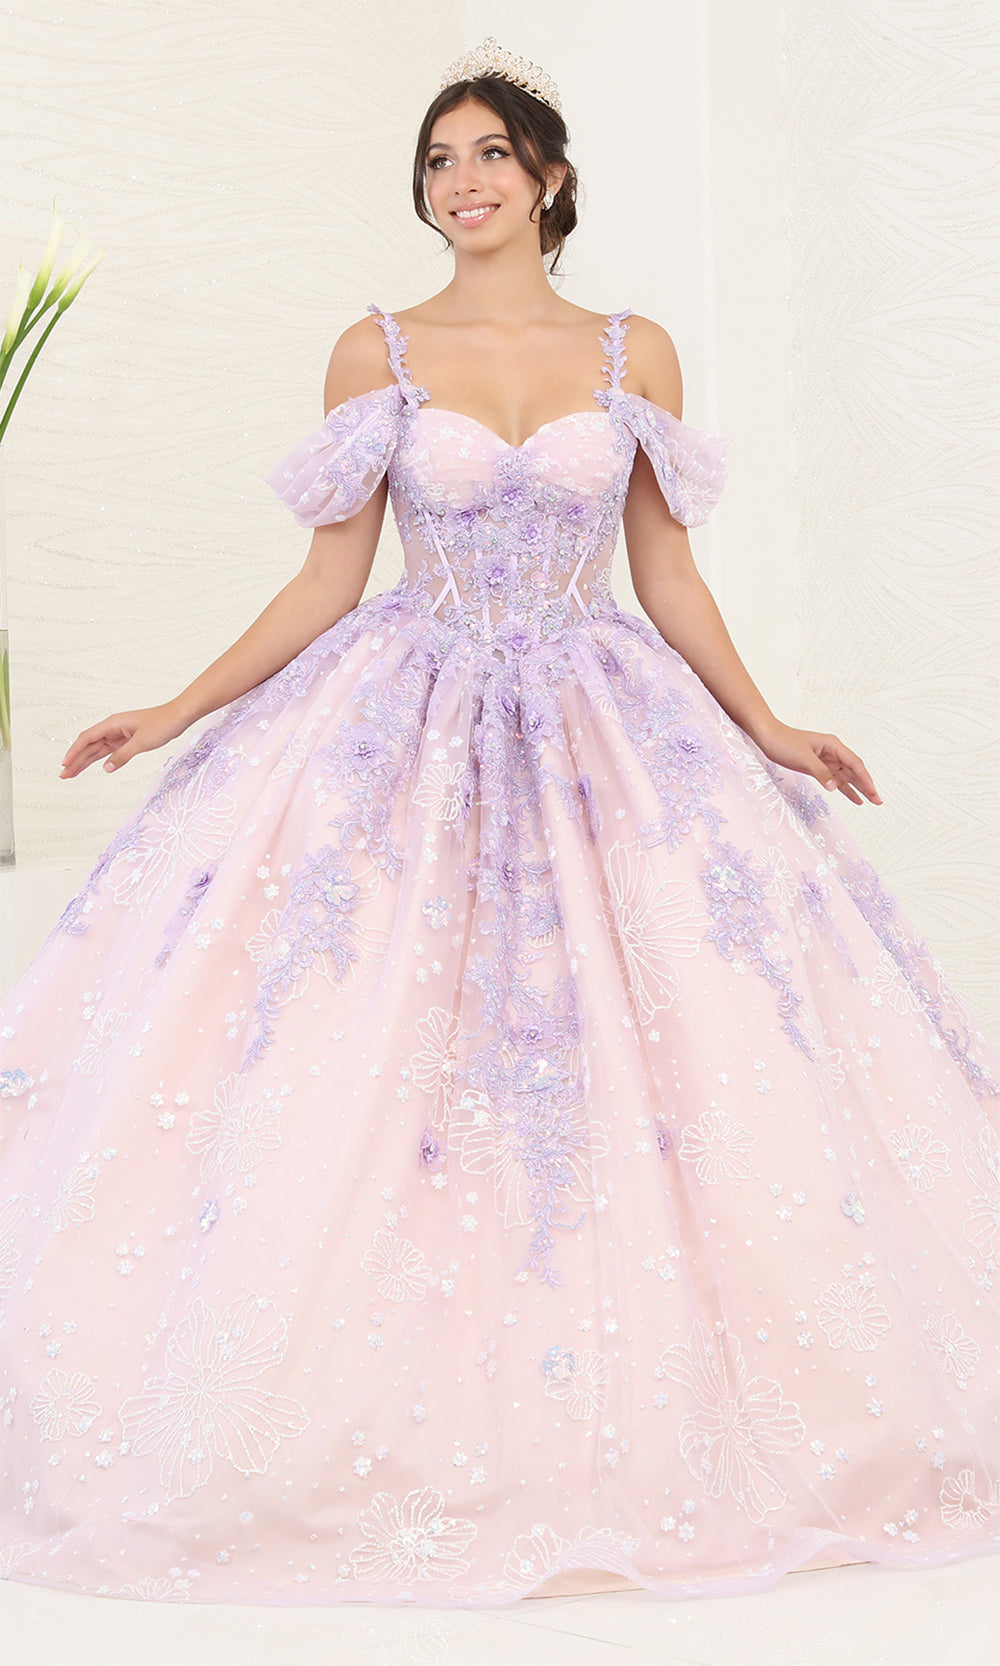 May Queen LK257 Lilac/Blush